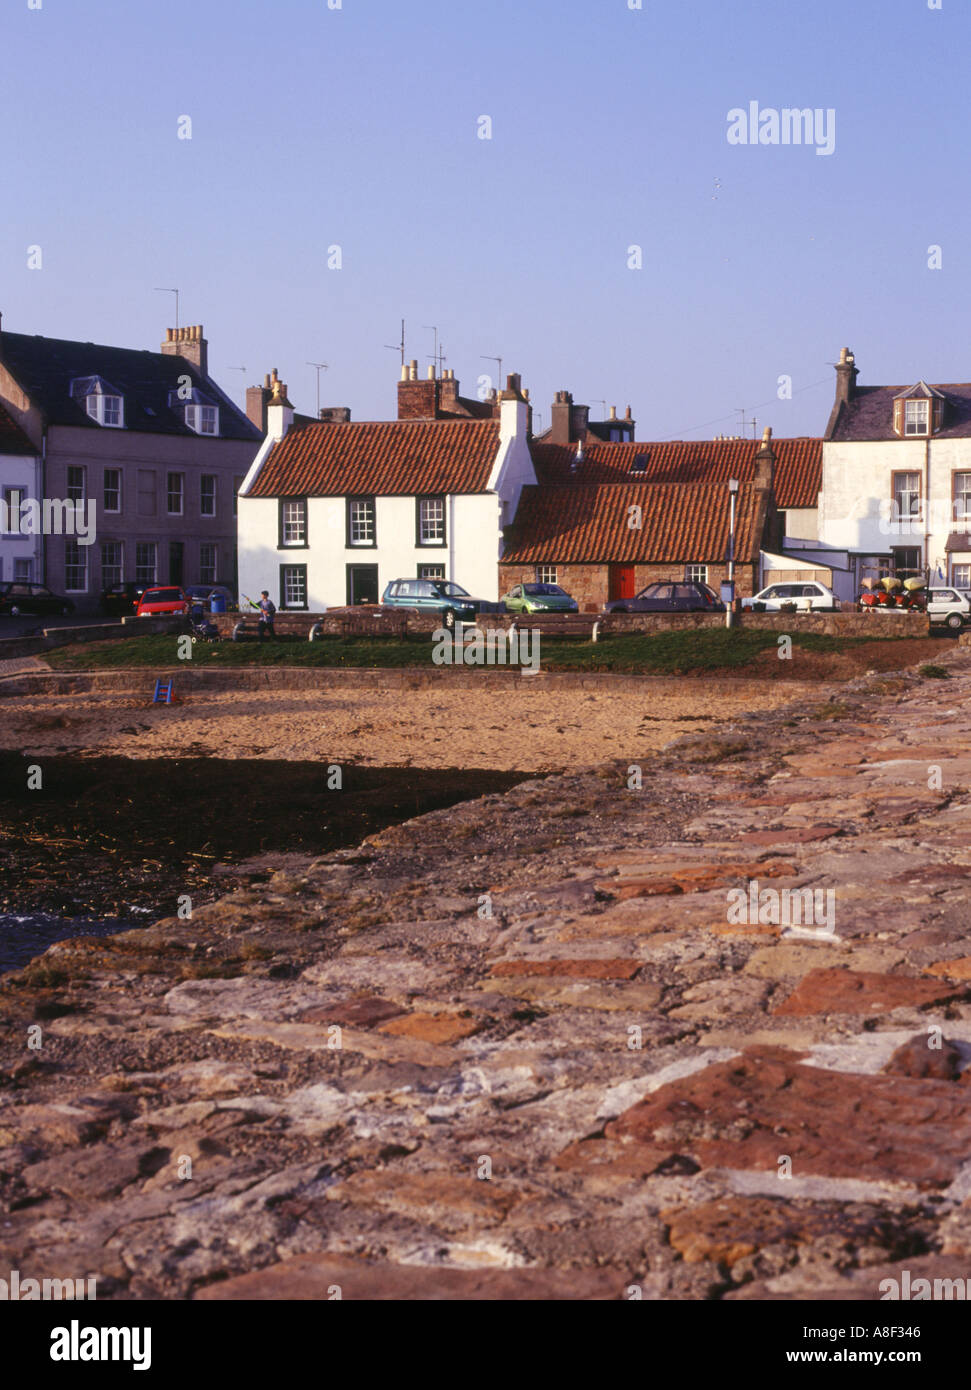 dh Cellardyke harbour ANSTRUTHER EASTER FIFE Skinfast Haven harbour white houses and pier east neuk Stock Photo